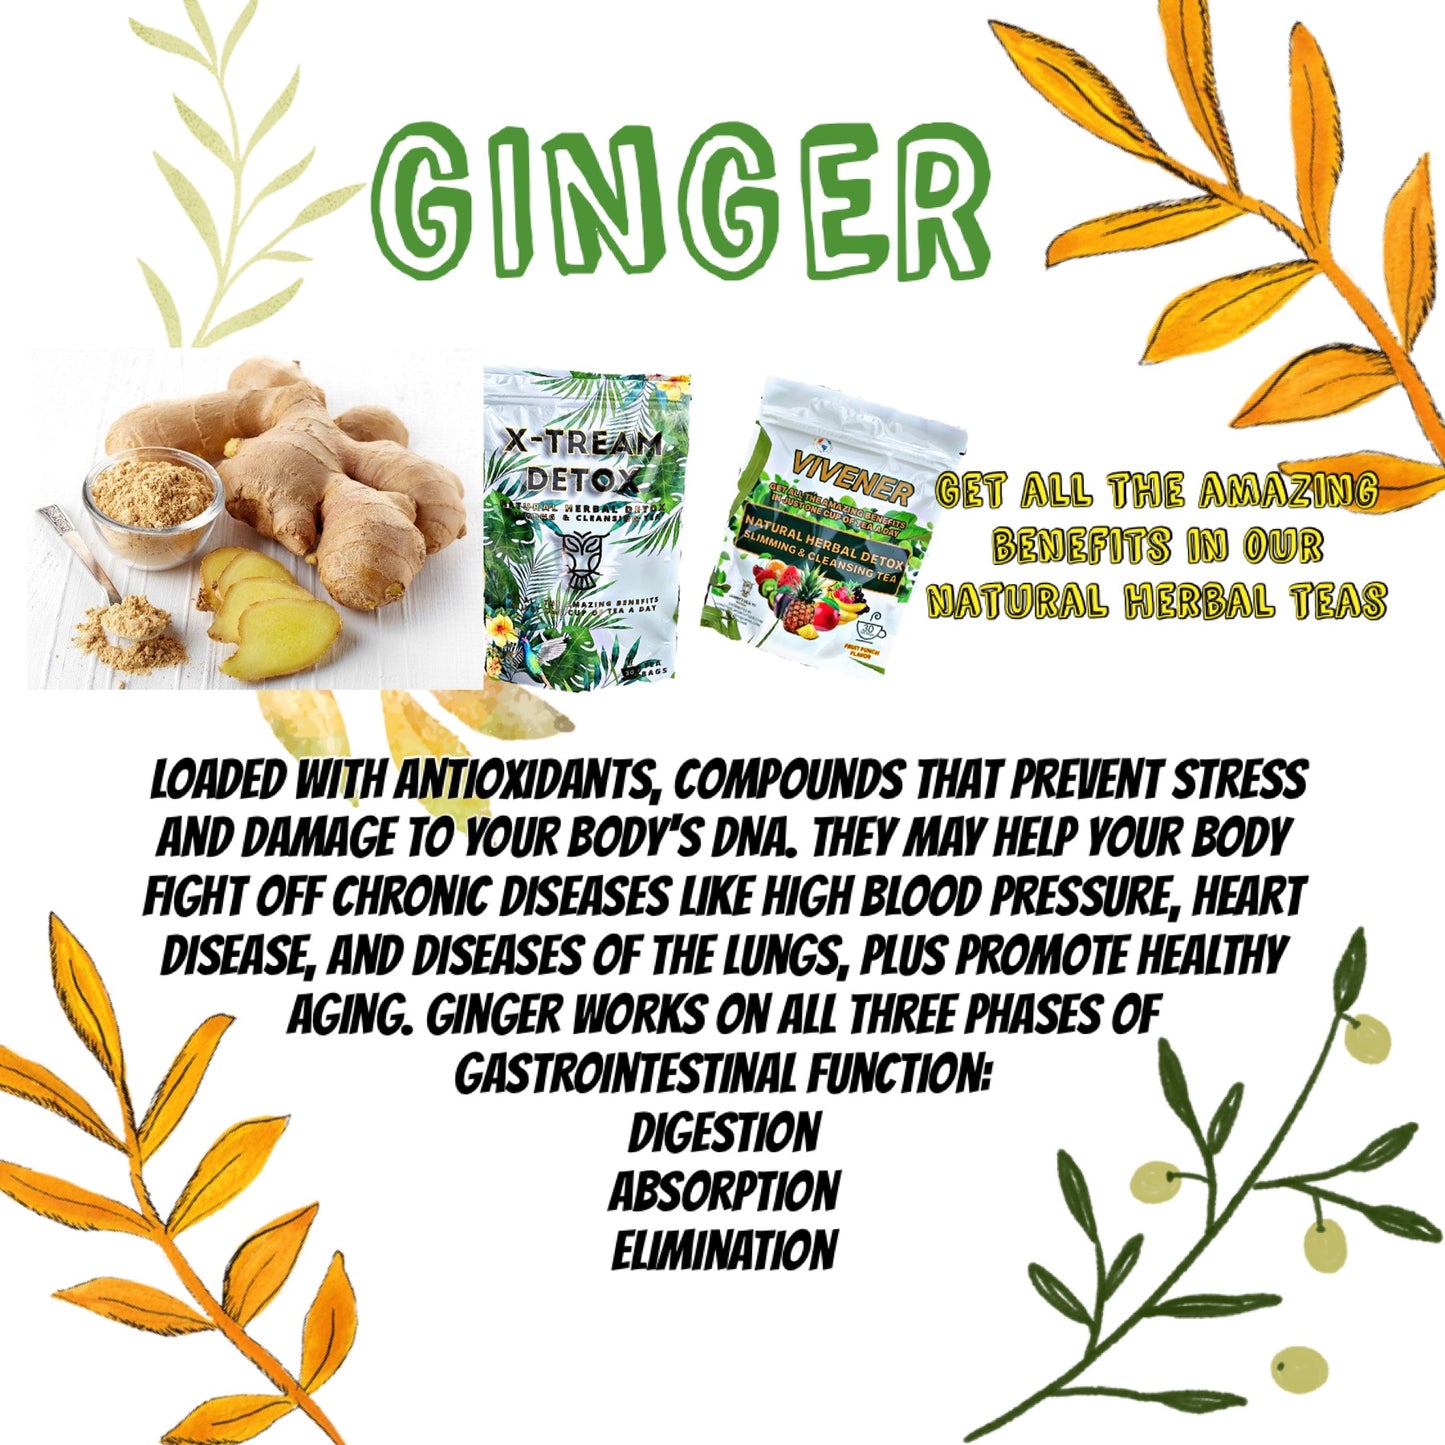 (SOFTER) VIVENER DETOX TEA with 30 baggies inside (FOR SENSITIVE STOMACH) SOFTER VERSION 🌱with extra ginger and ginger aftertaste ✅FOR MORE IMMUNE SUPPORT BOOST (GINGER SHOT WITH BETTER FLAVOR IN TEA✅)